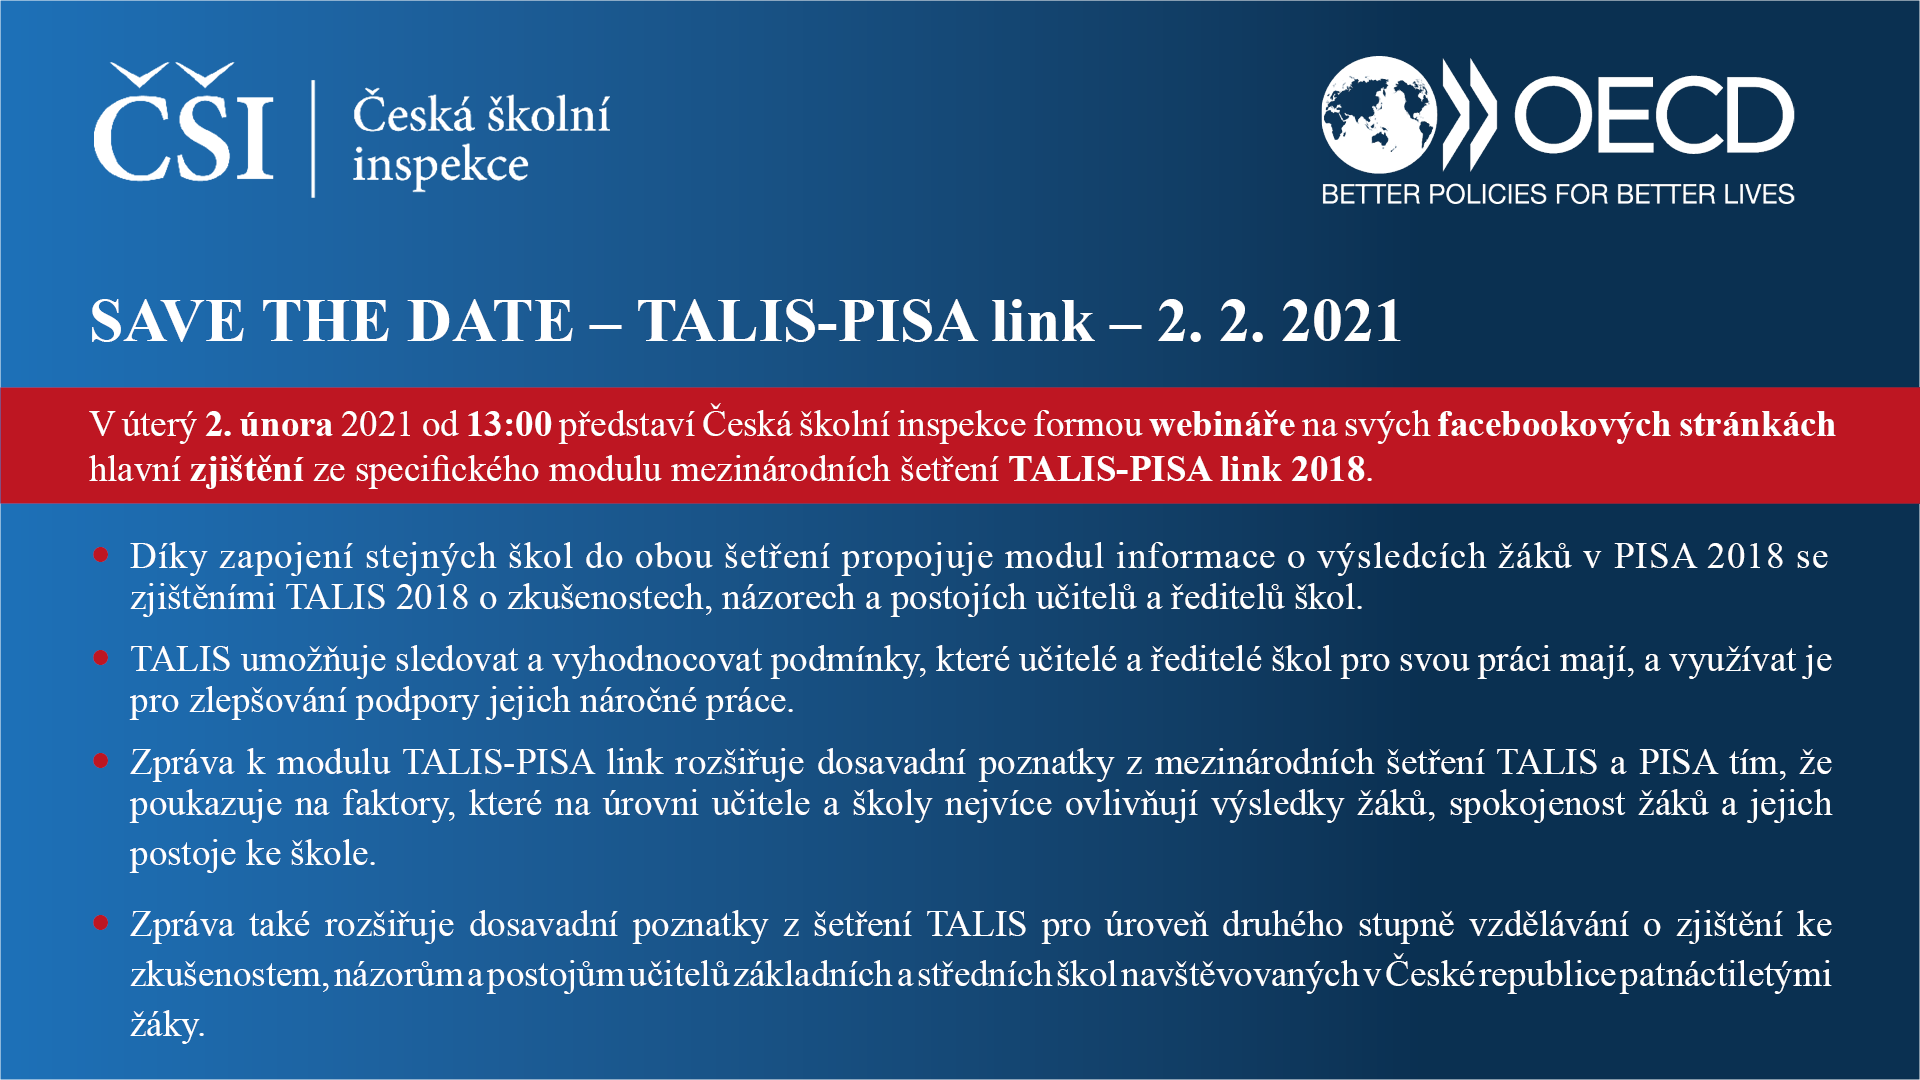 SAVE THE DATE - TALIS-PISA link - 2. 2. 2021